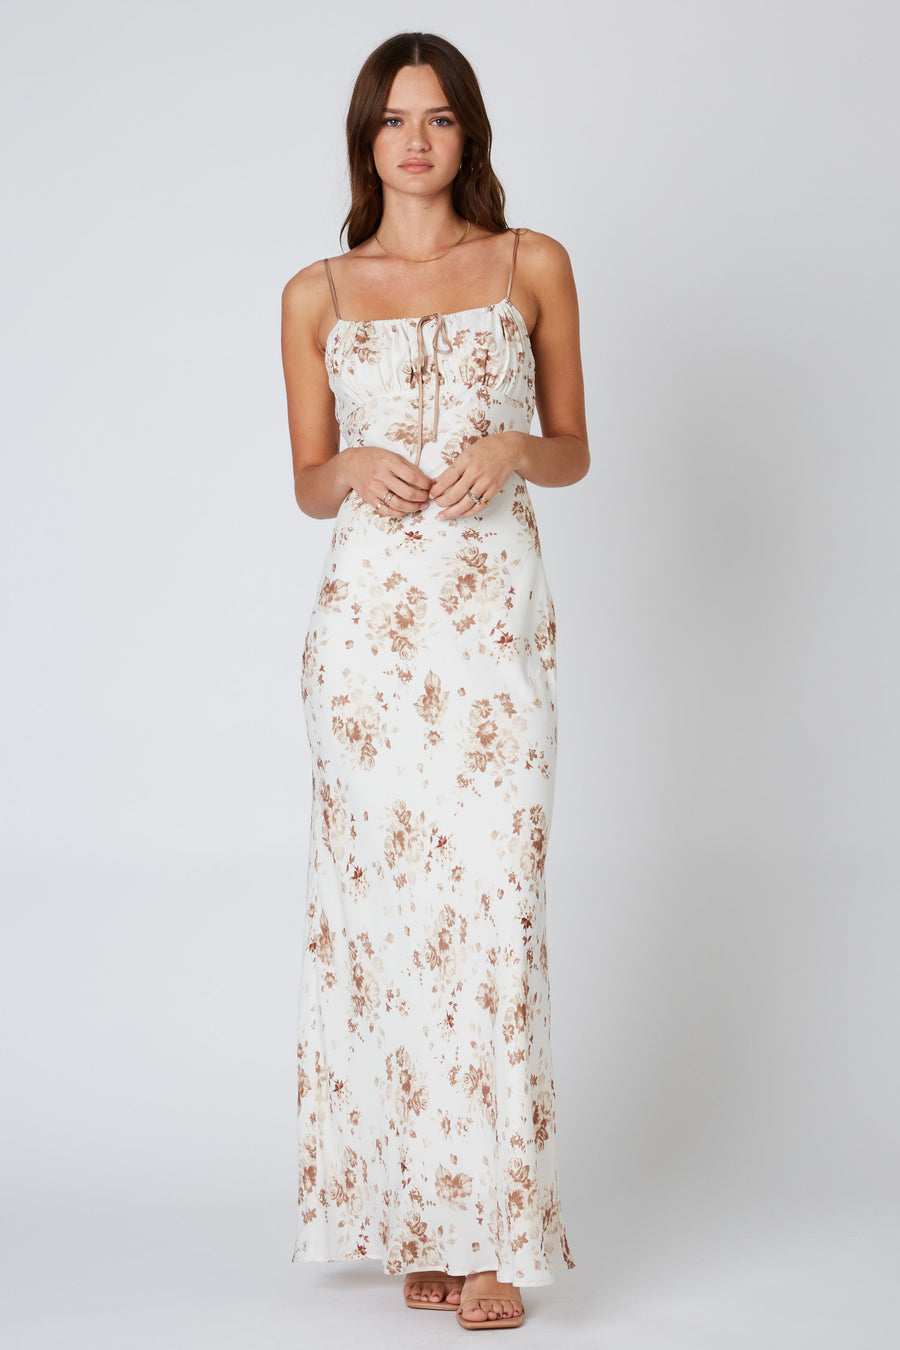 Maxi dress with floral print in the color toast.